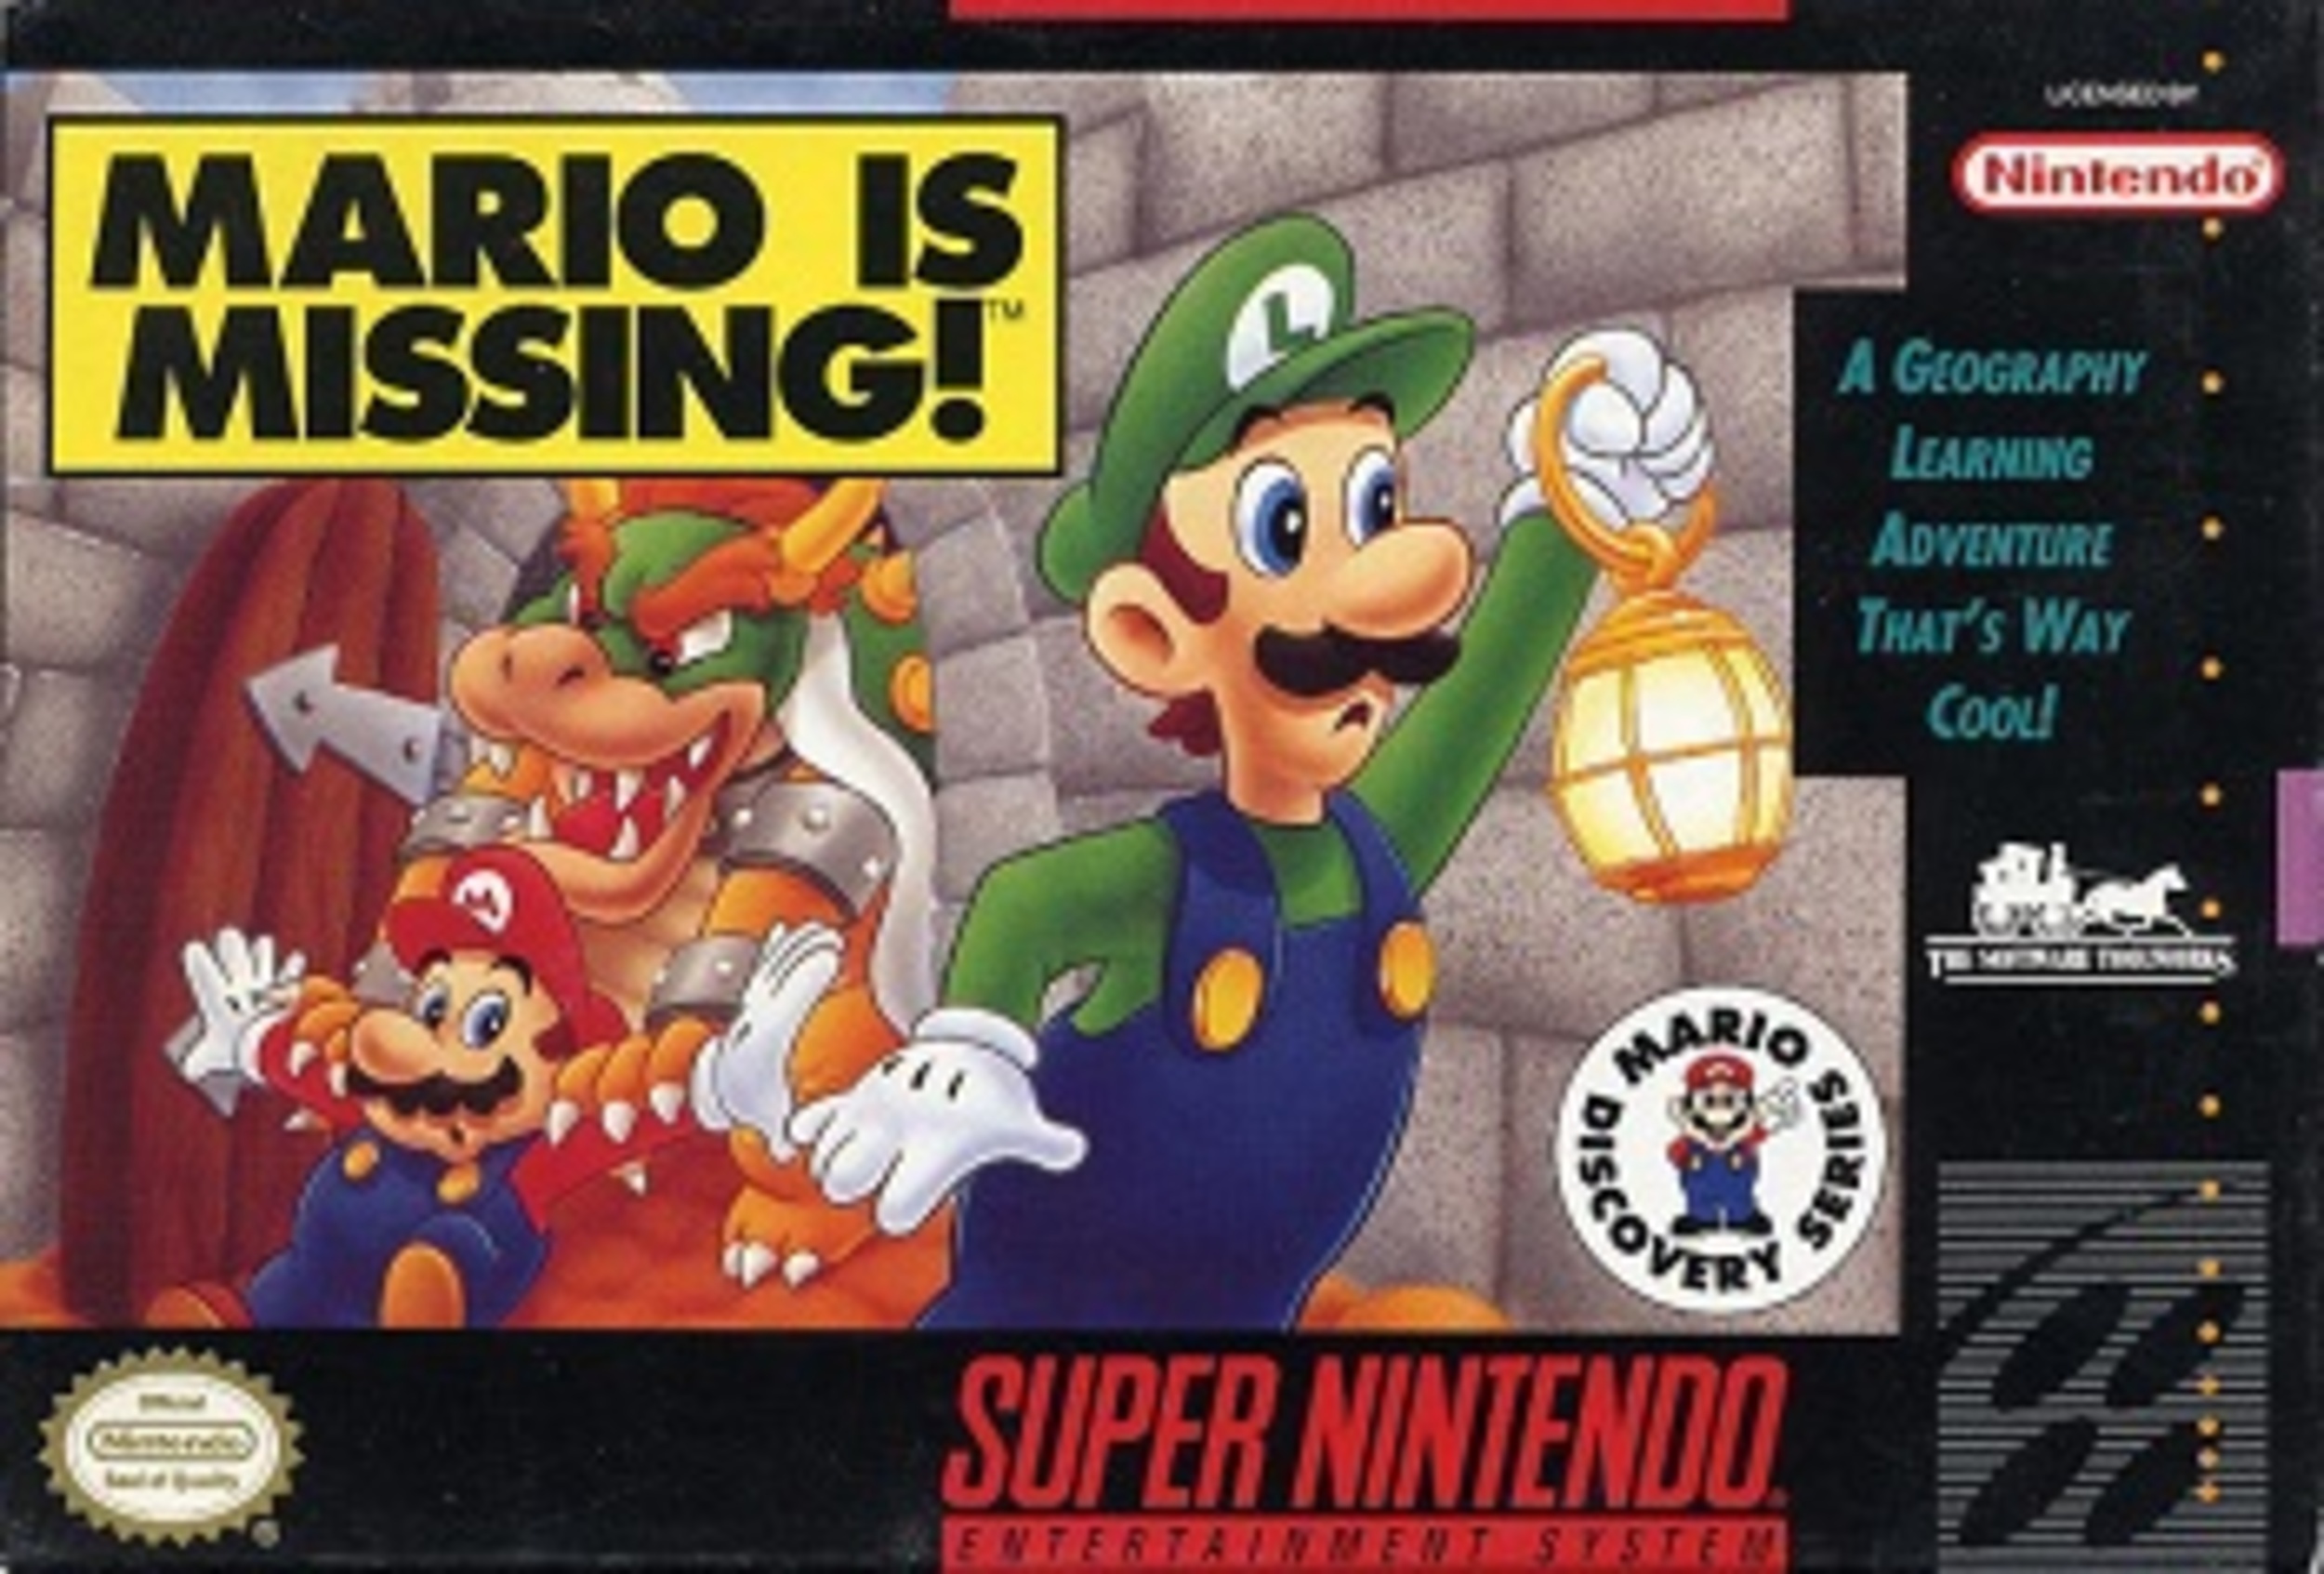 <p>Educational games and Nintendo go together like mayo and bubble gum: Their purposes cancel each other out, and the result is a bland, sticky mess.<br><br><em>Mario Is Missing! </em>applied the adventure game formula to the Mario universe in which Bowser kids Mario and players are forced to (shiver) learn geography by traveling the globe to save his little brother. The SNES version is almost unplayable since there don't seem to be any solid instructions besides just making poor Luigi wander around a 2D world with no apparent purpose. Plus, educational games just don't work on the Nintendo unless the game element is WAY higher than the gaming part. Playing it after school just felt like the teacher found a way to cram more homework into the machine. </p><p>You may also like: <a href='https://www.yardbarker.com/entertainment/articles/20_of_the_best_tv_shows_youre_not_watching/s1__40002609'>20 of the best TV shows you're not watching</a></p>